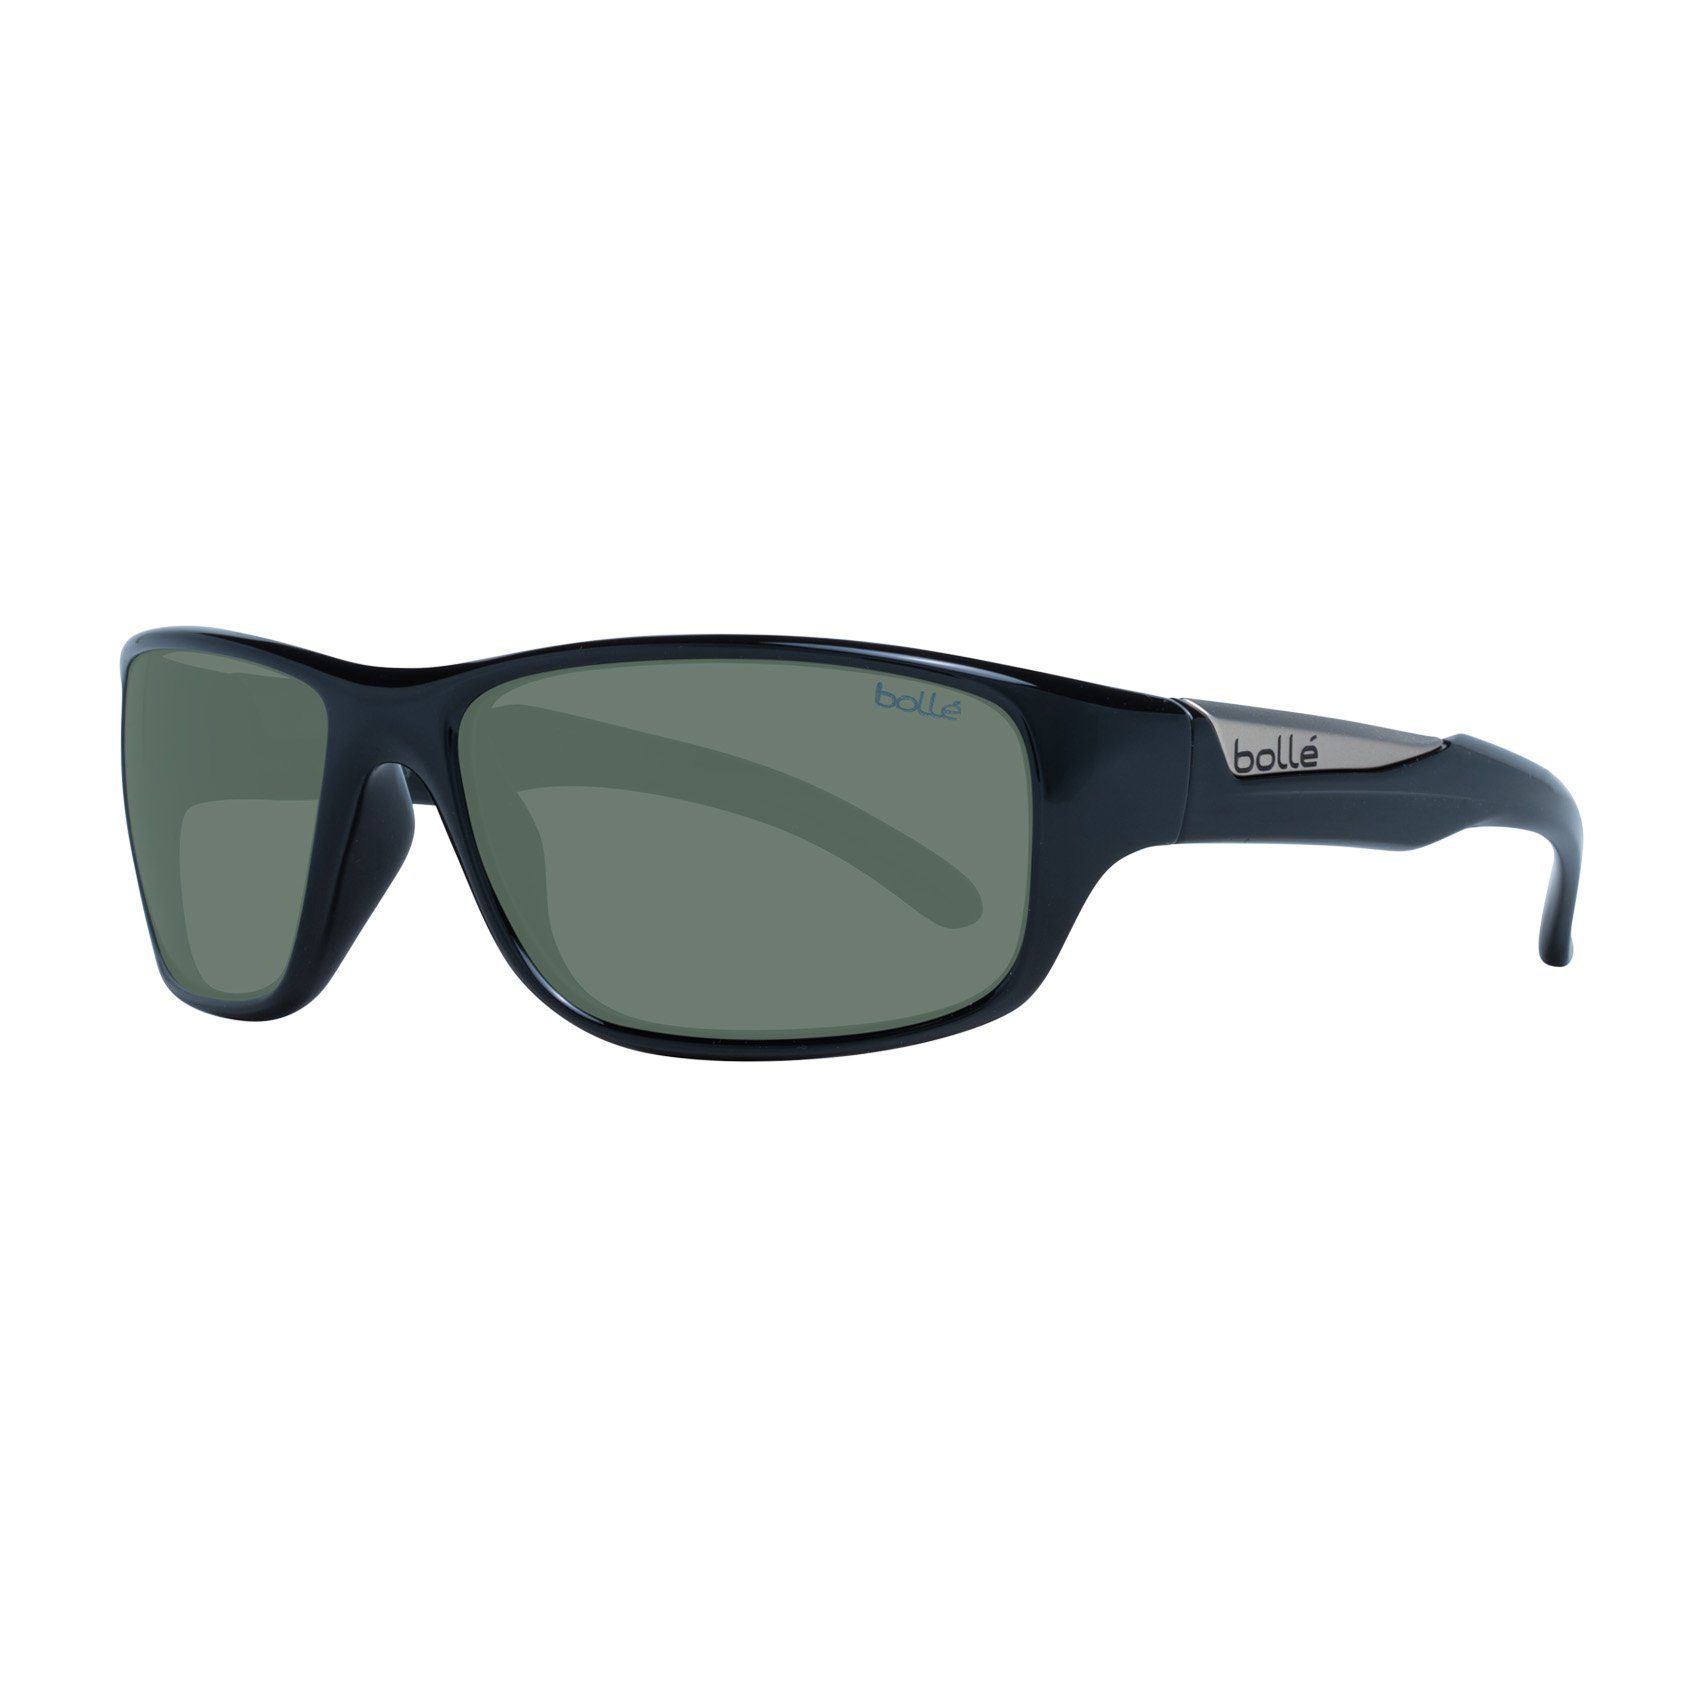 Sonnenbrille 11651 Black Italy Made 59 Vibe in Shiny Bolle